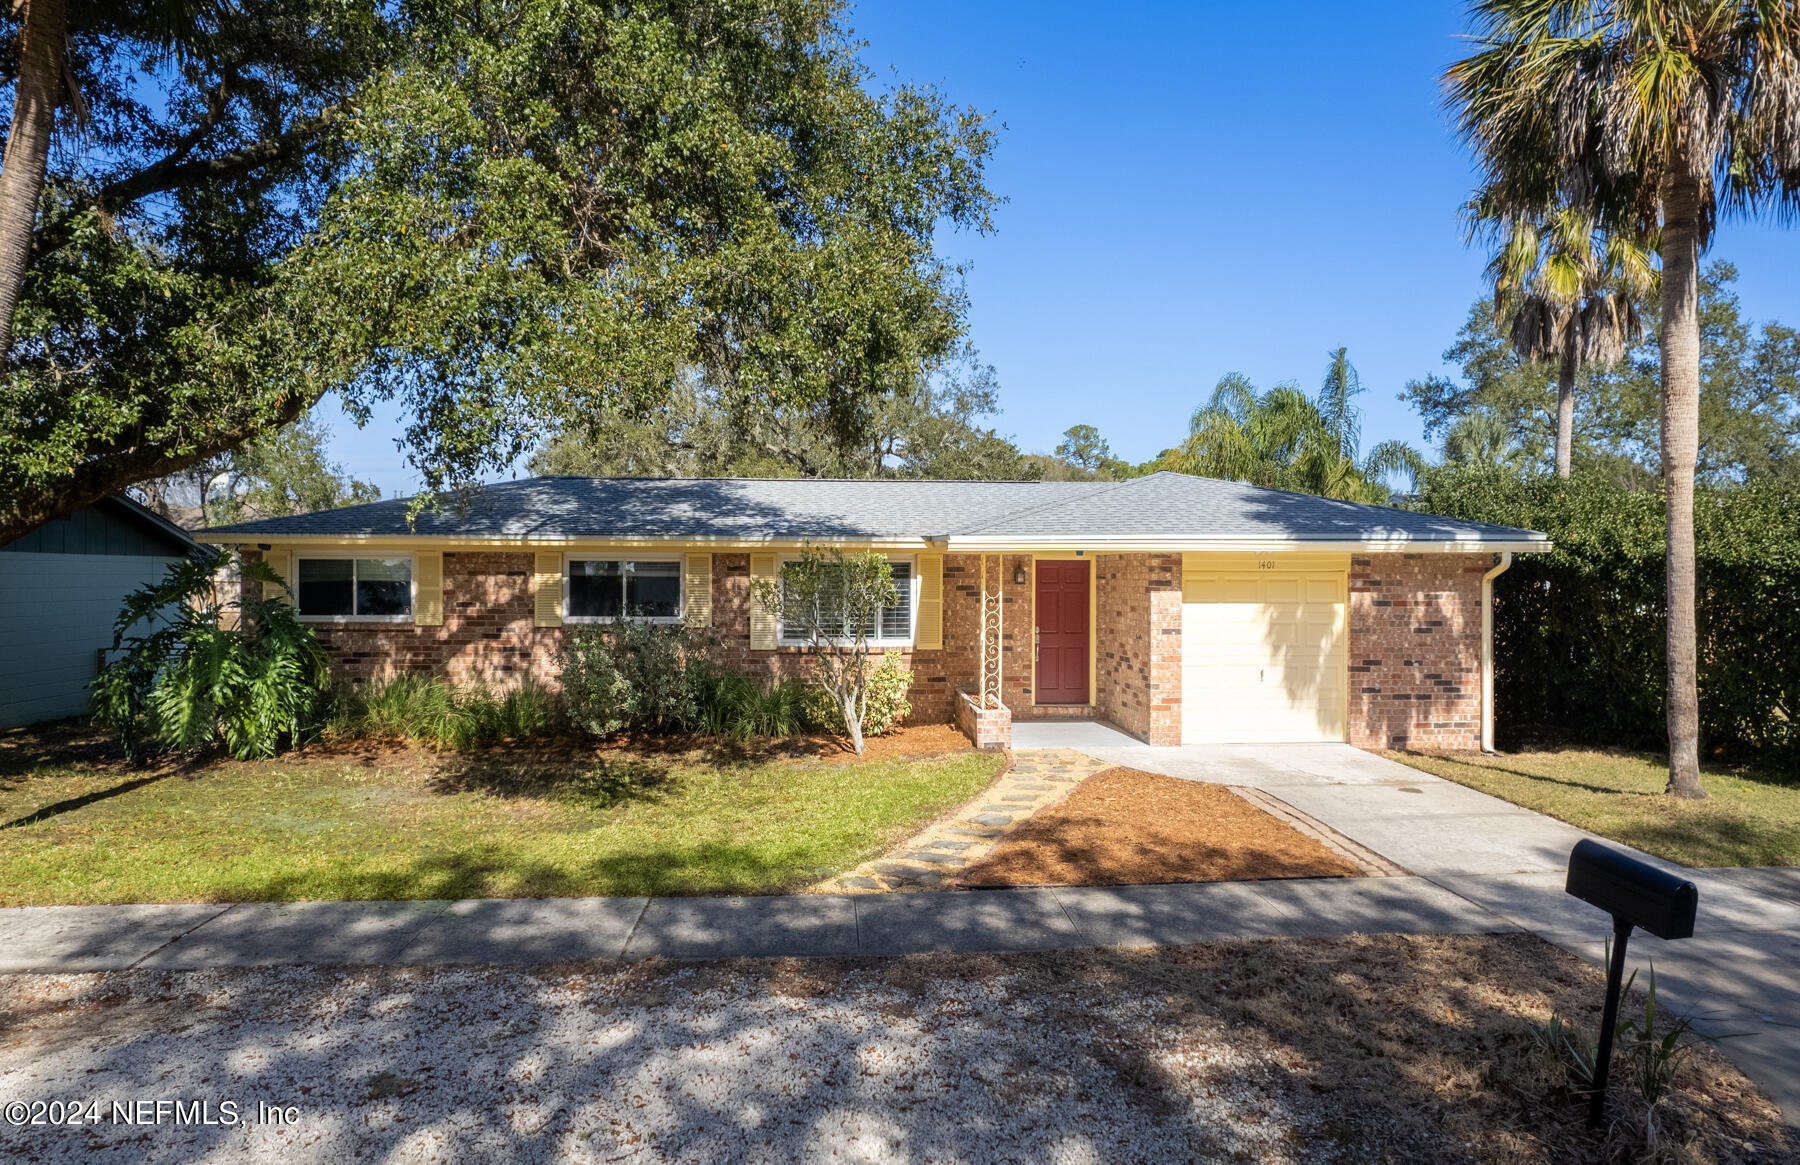 Jacksonville Beach, FL home for sale located at 1401 Osceola Avenue, Jacksonville Beach, FL 32250